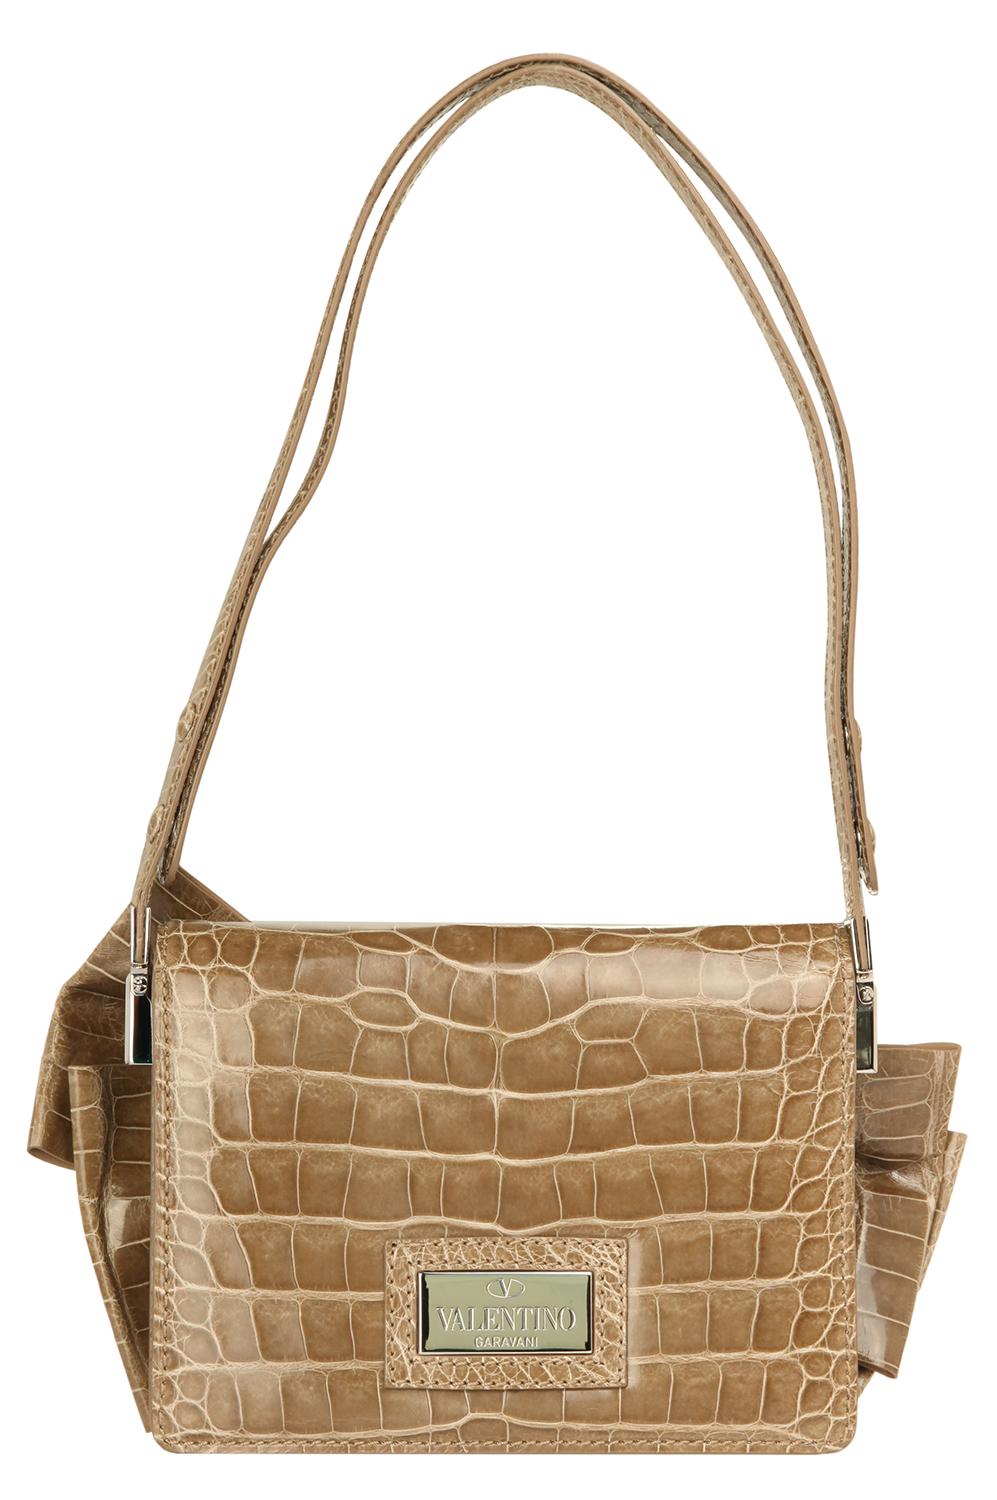 Item number 6WB00620-ACOD03-T47
Color taupe
Material Alligator leather
Lining leather
Compartments: 2 main compartments, 2 zipper pockets, 2 pockets
Dimensions width: 22 cm, height: 16 cm, depth: 8 cm
Closure Magnetic snap closure
Weight in grams